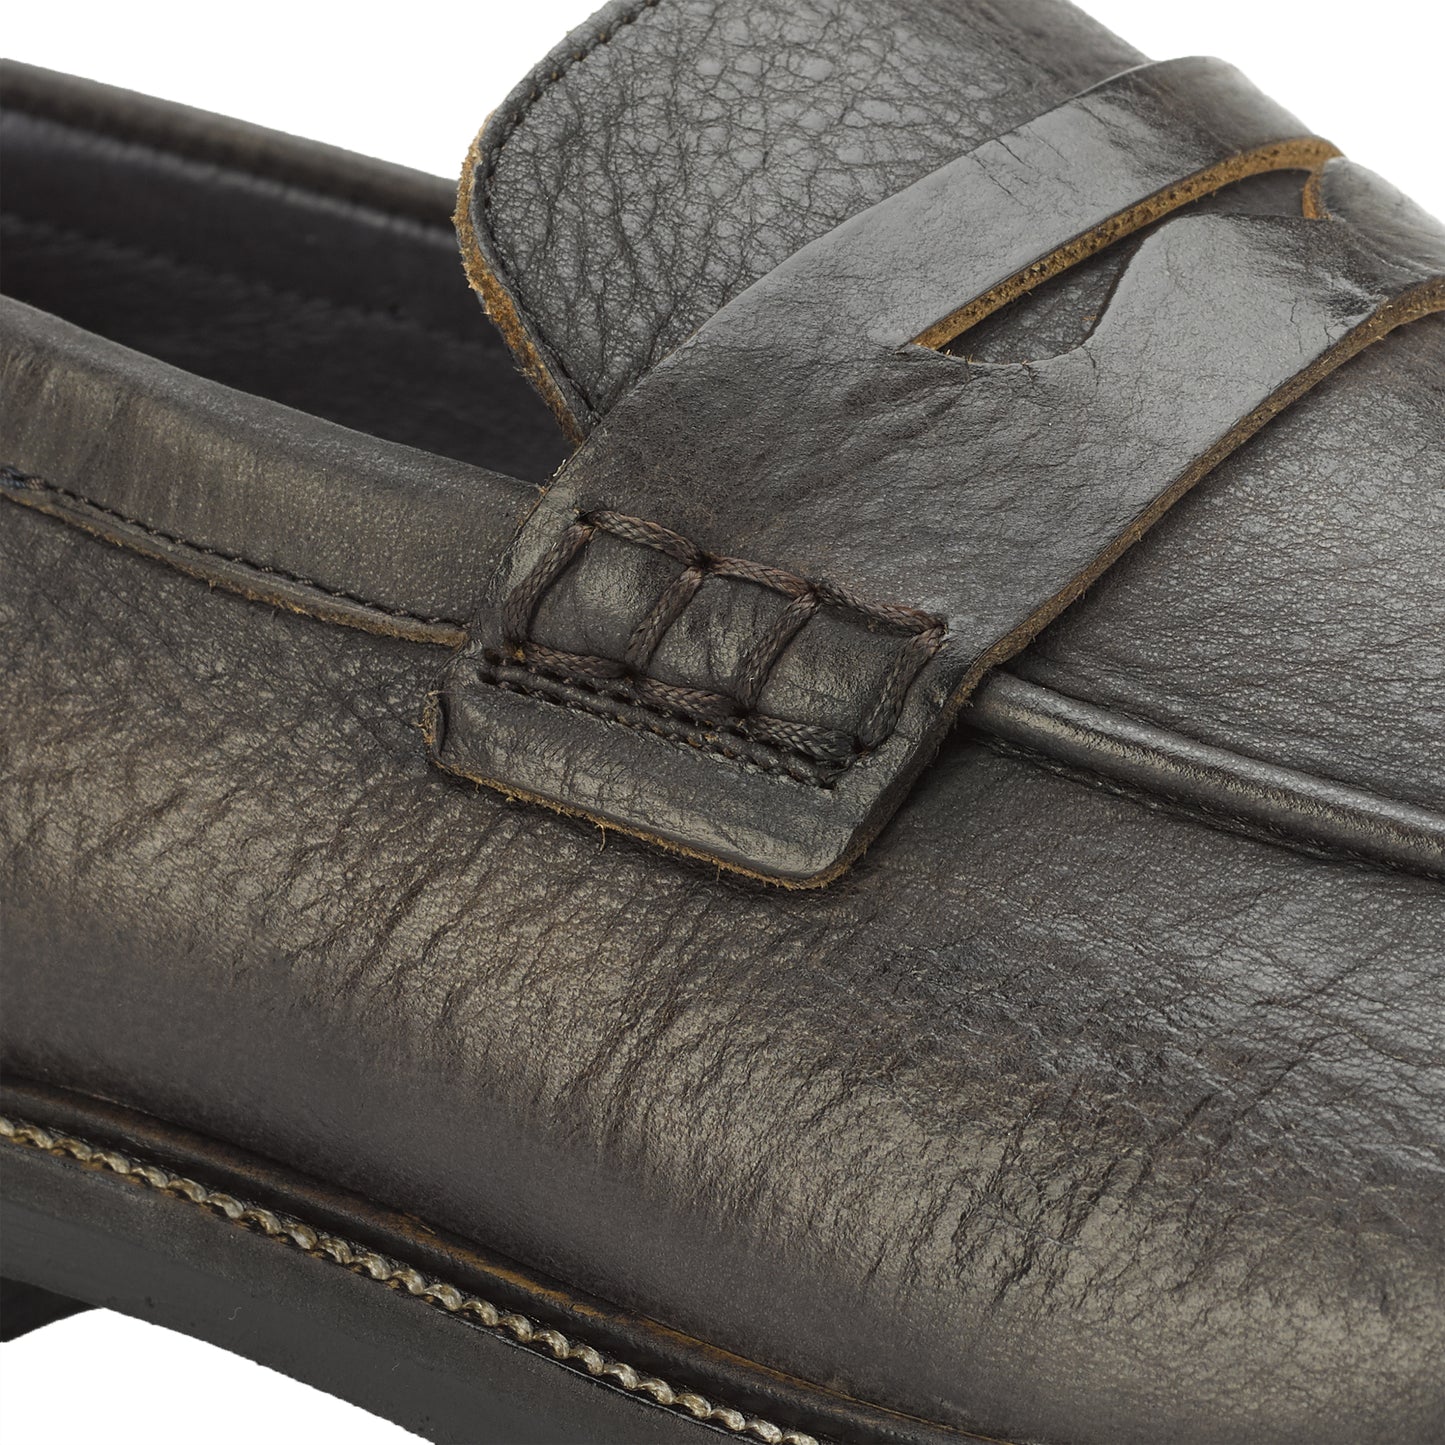 Ambitious Caye Leather Loafer